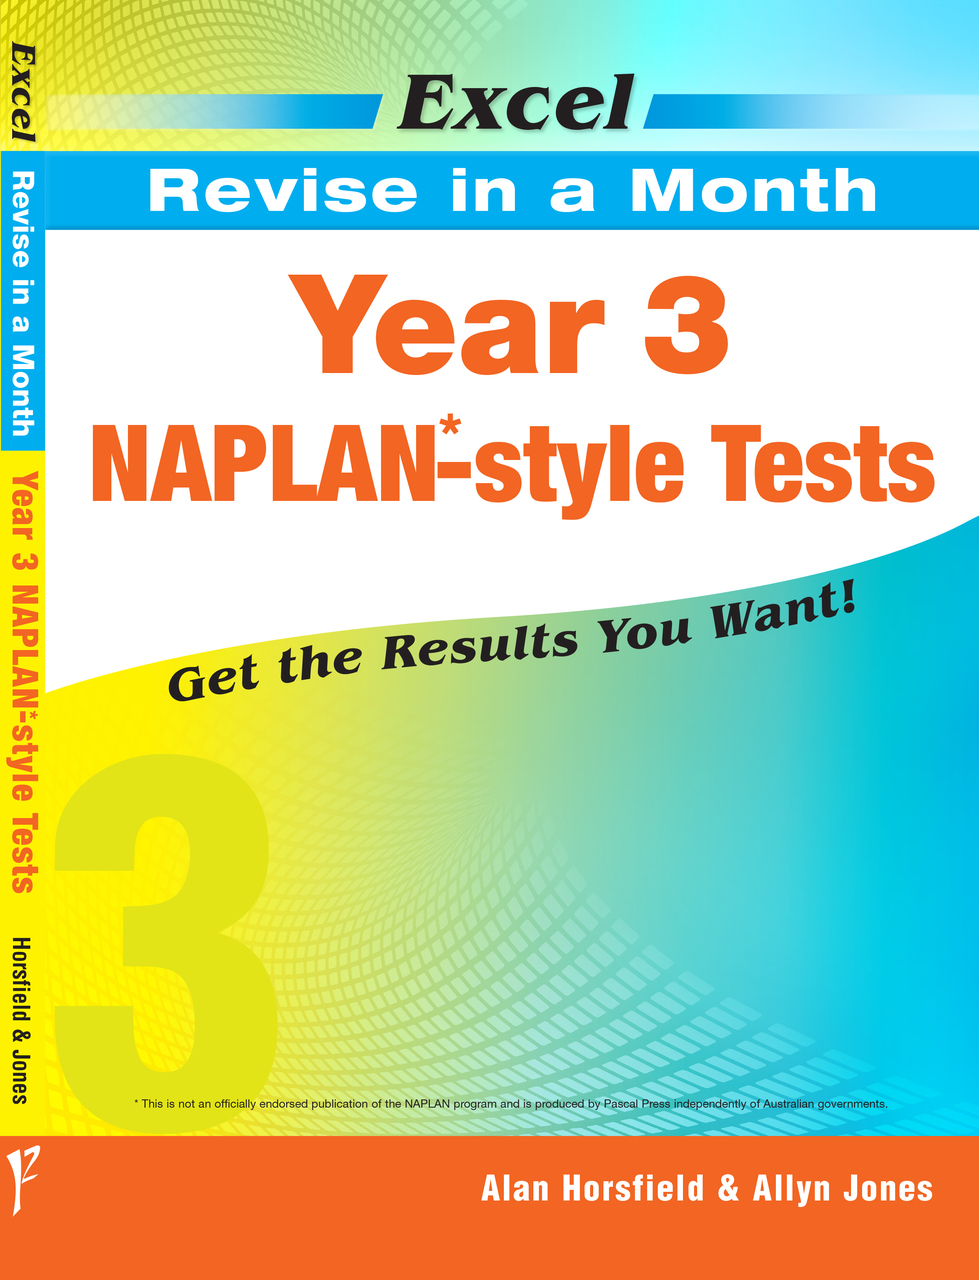 EXCEL REVISE IN A MONTH - YEAR 3 NAPLAN*-STYLE TESTS